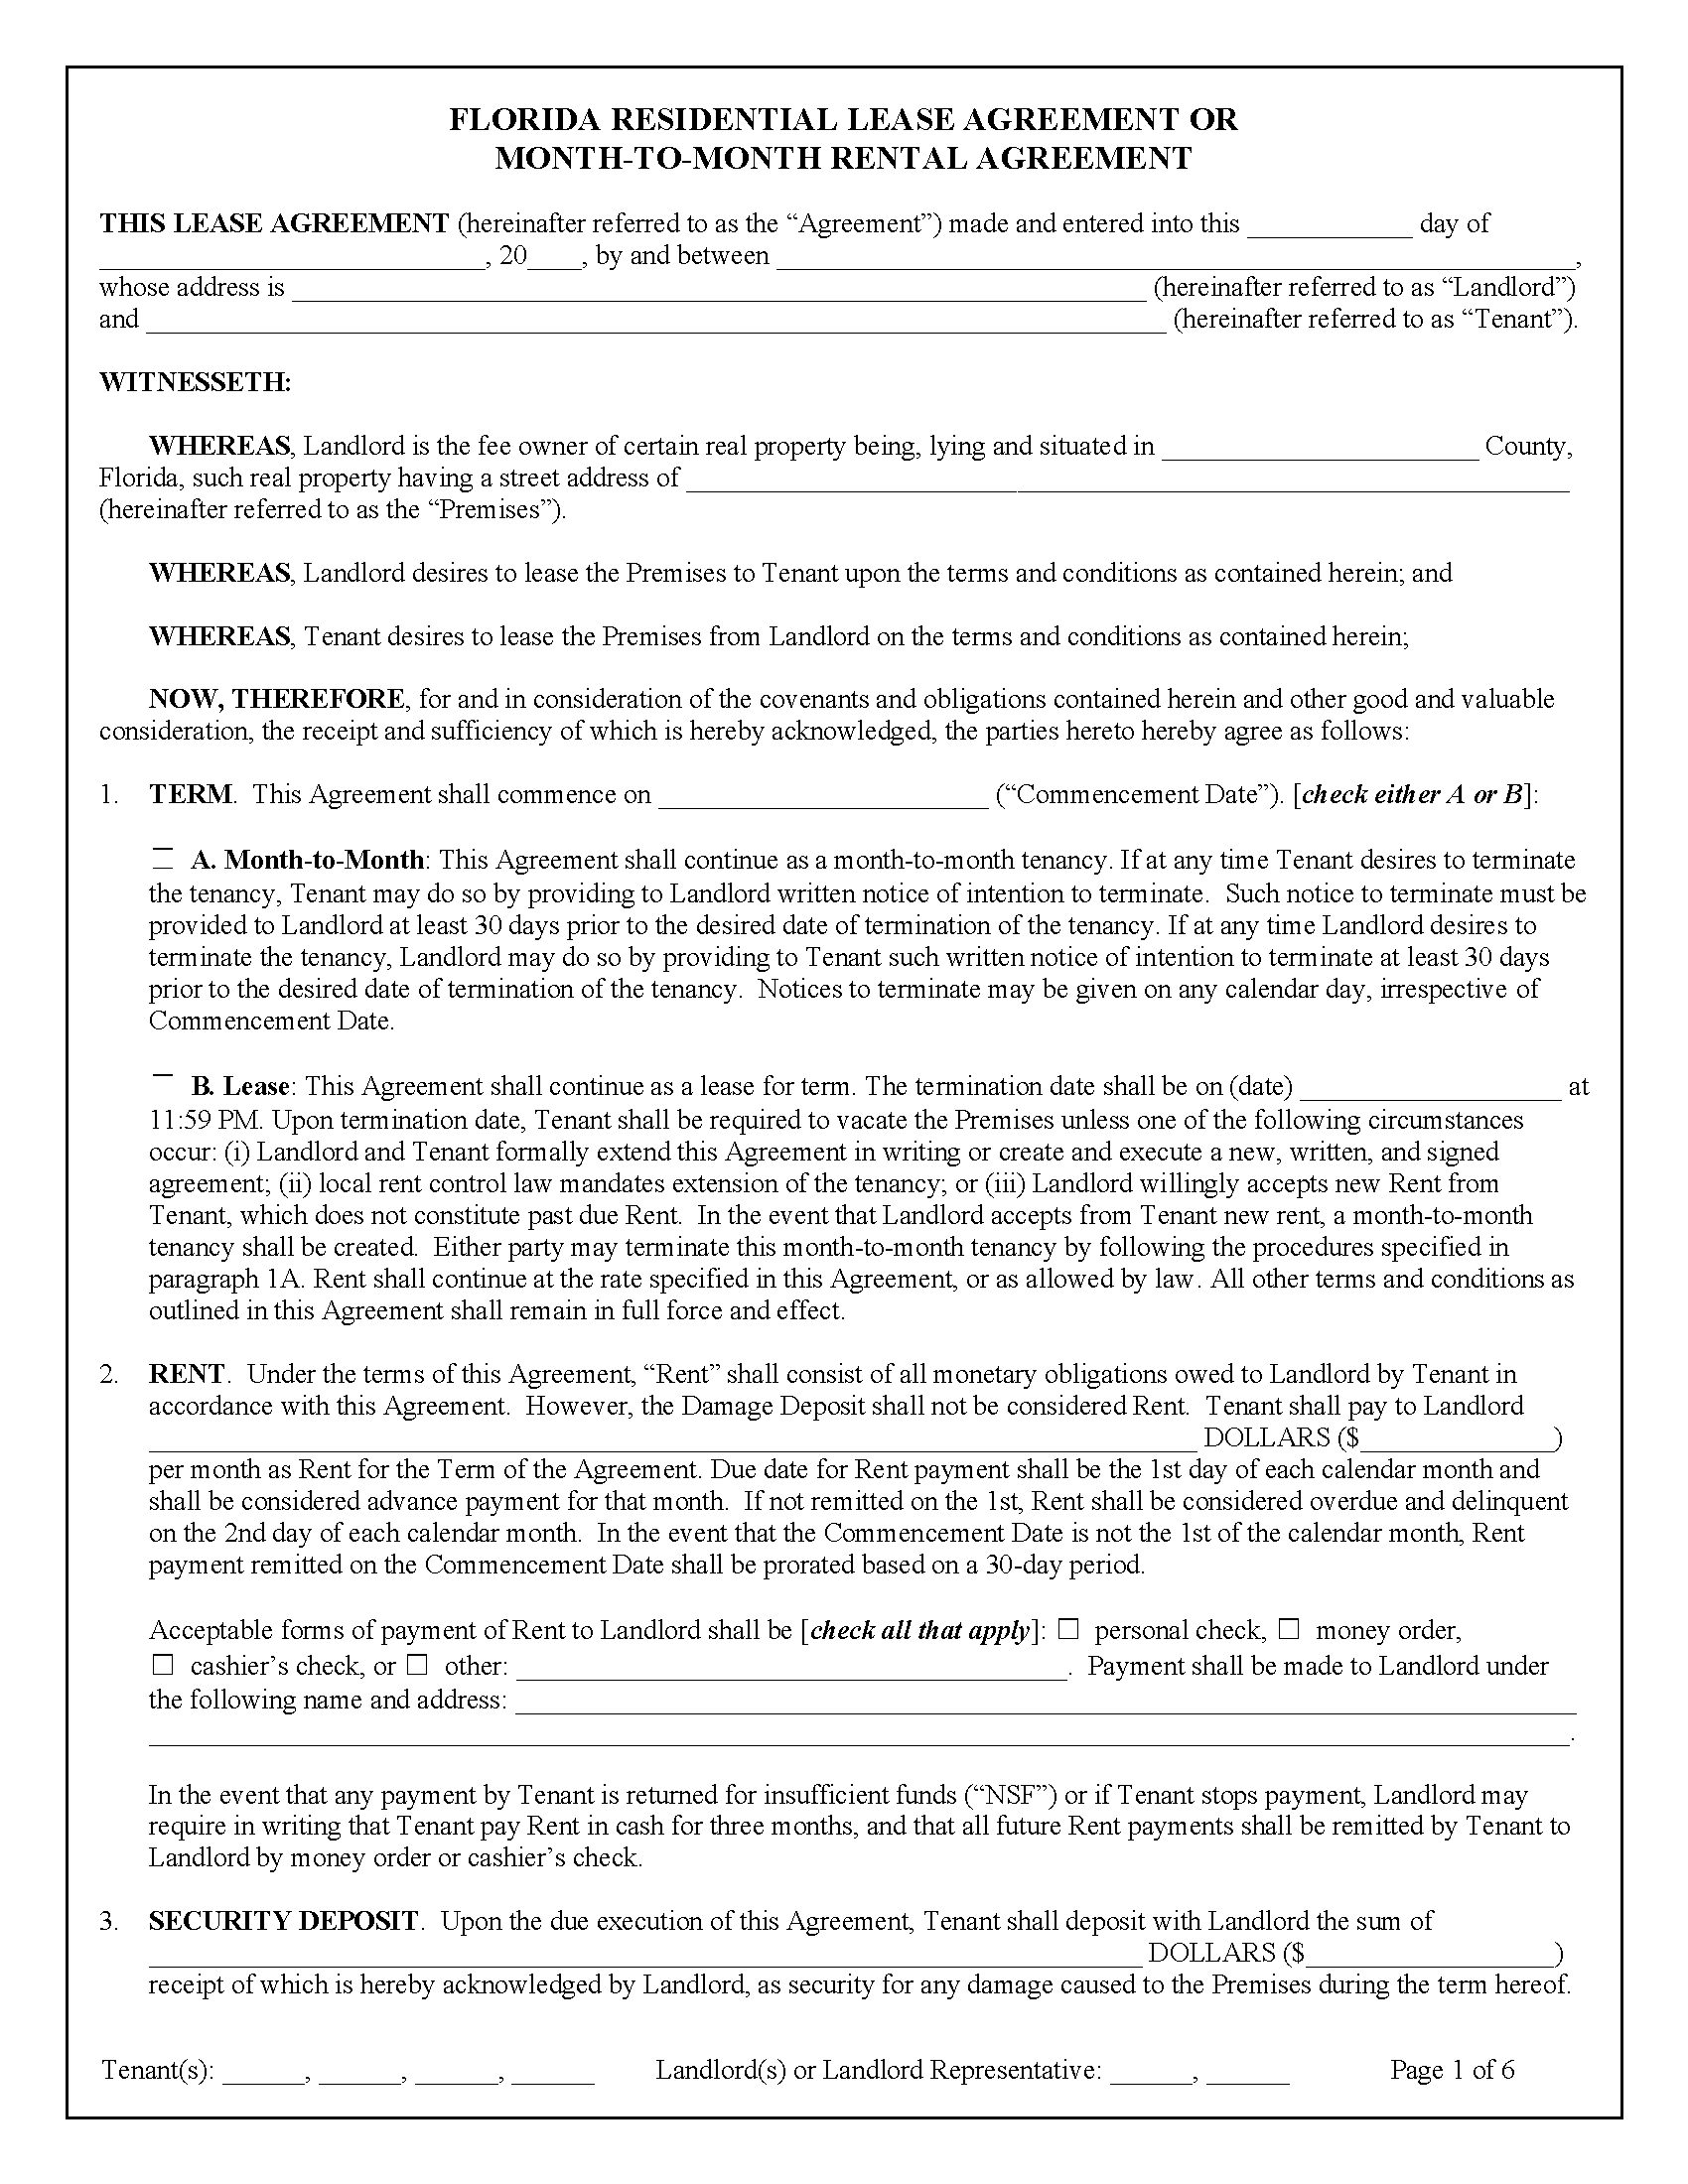 free florida residential lease agreement pdf ms word